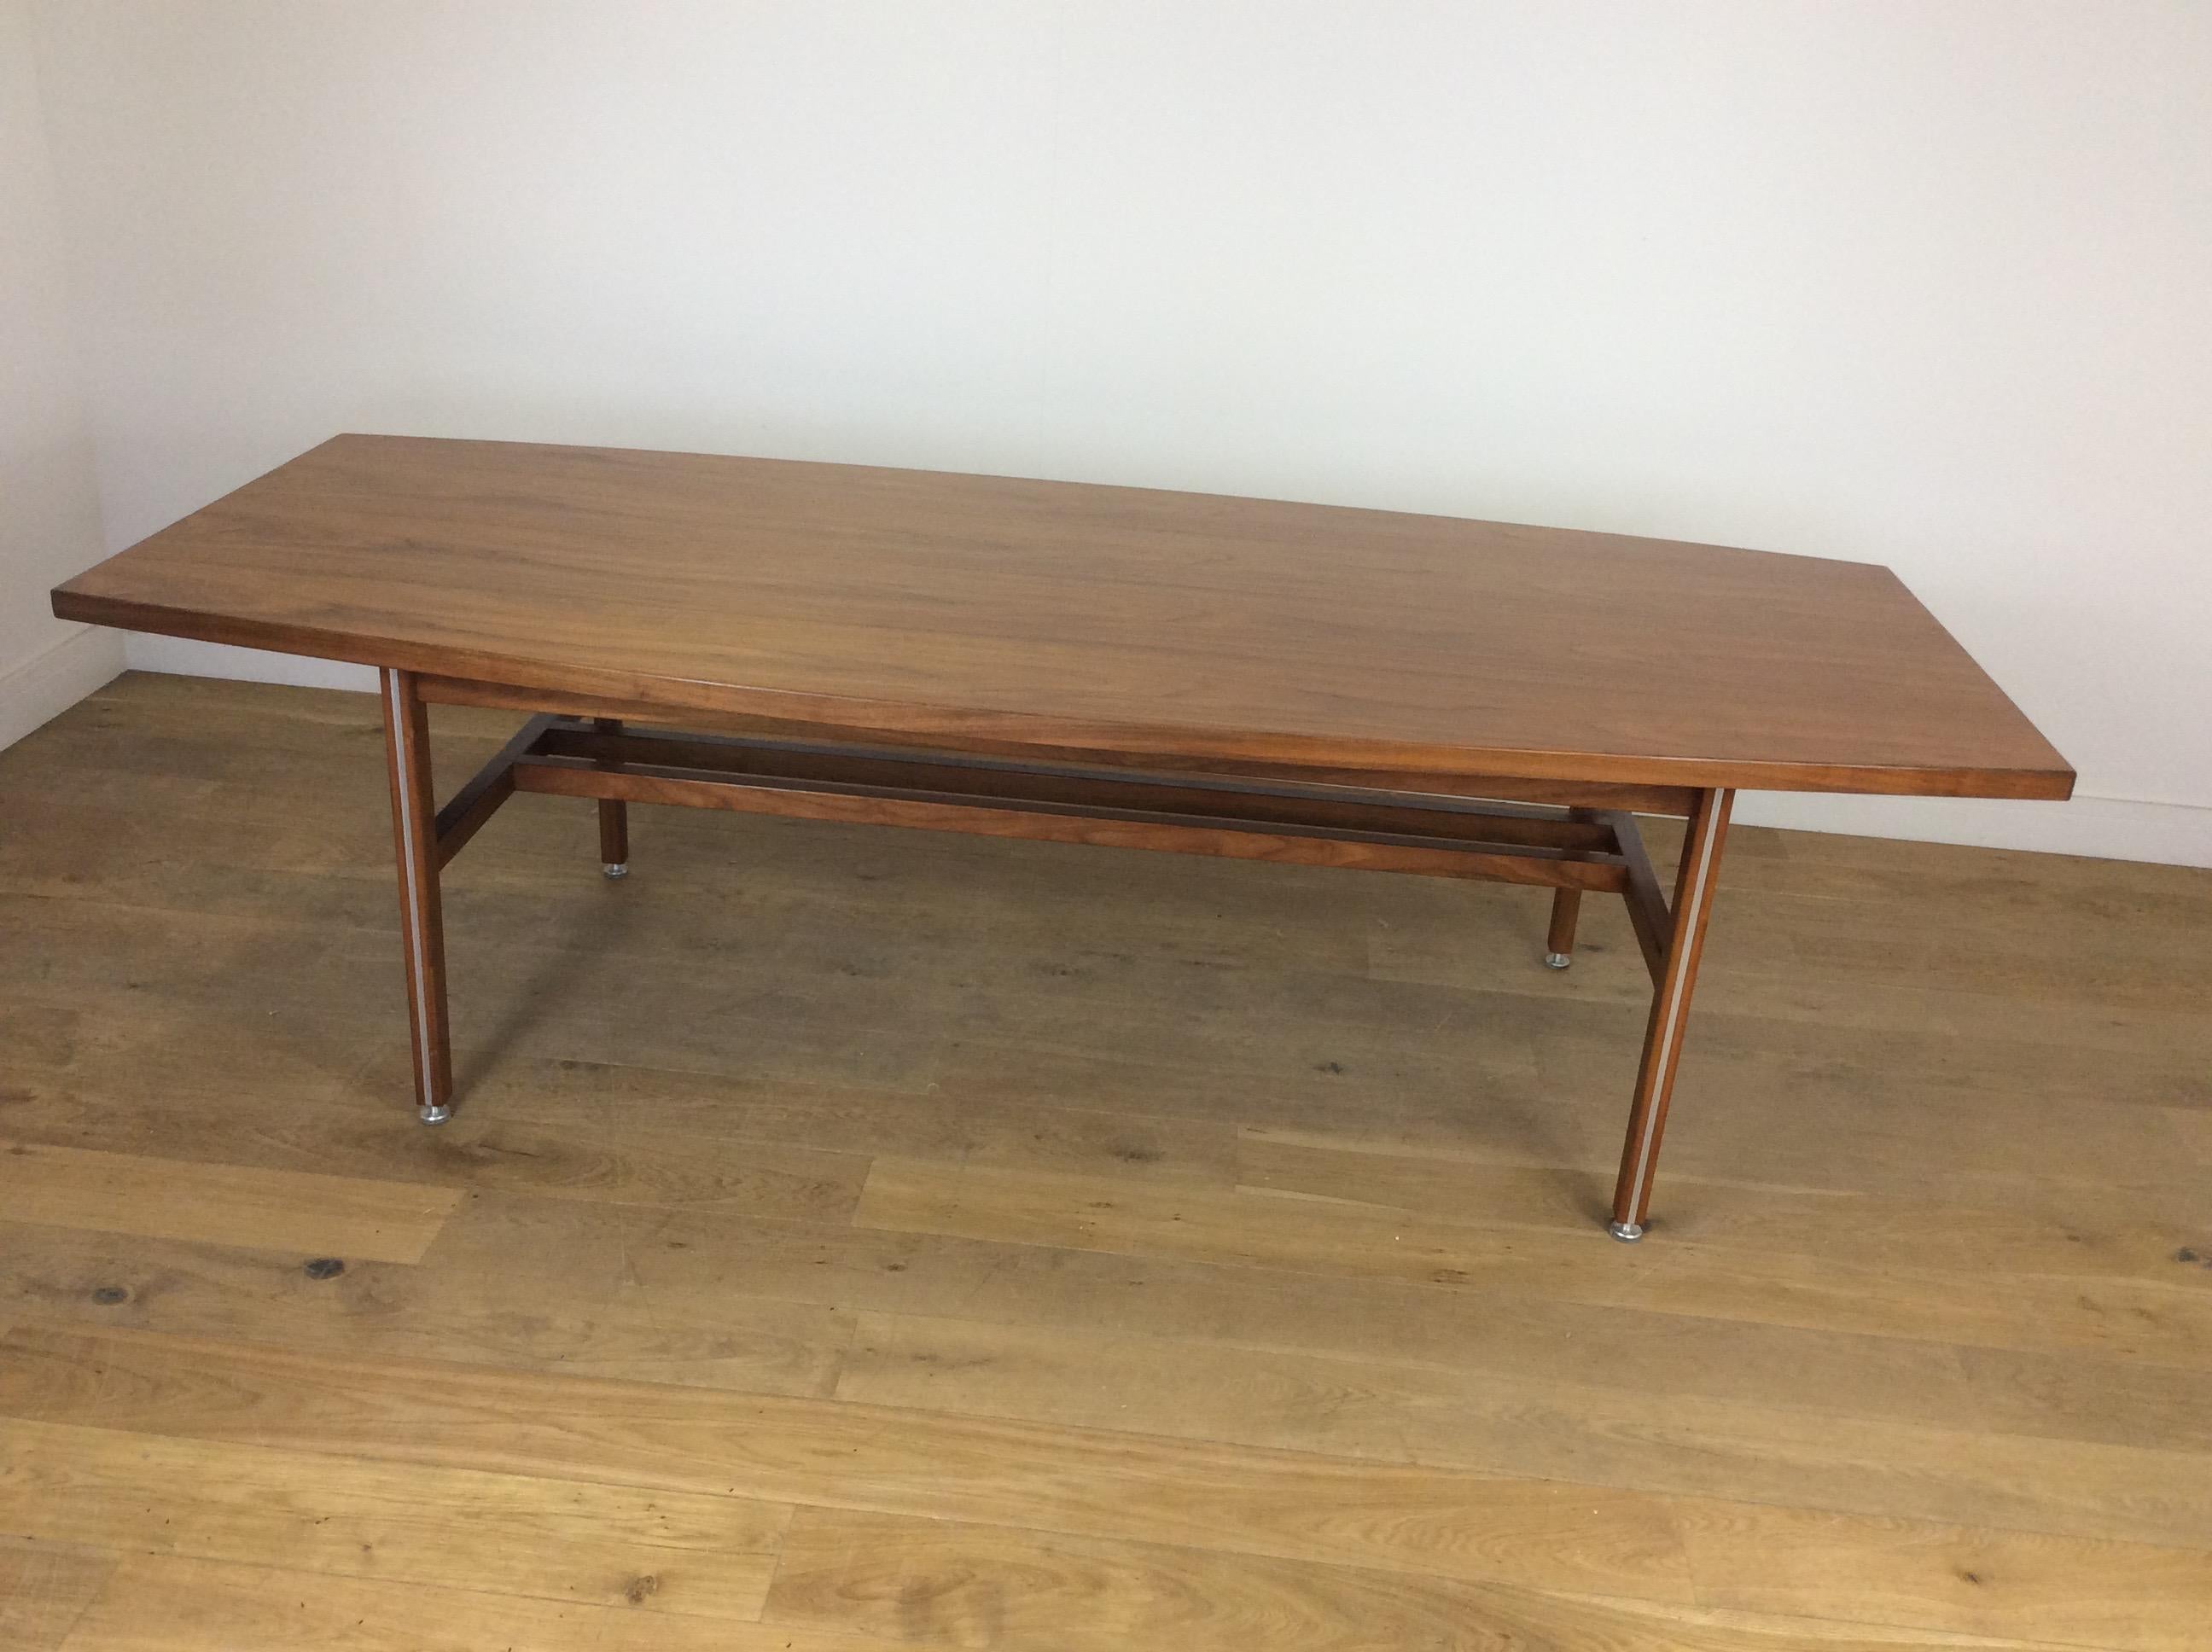 Midcentury 8ft long conference table in a beautiful walnut.
Raised on square column legs with inset aluminium with cross stretcher.
Height adjustable feet for perfect balance.
In the manner of Florence Knoll
Measures: 72.5 cm H, 244 cm W, 106 cm